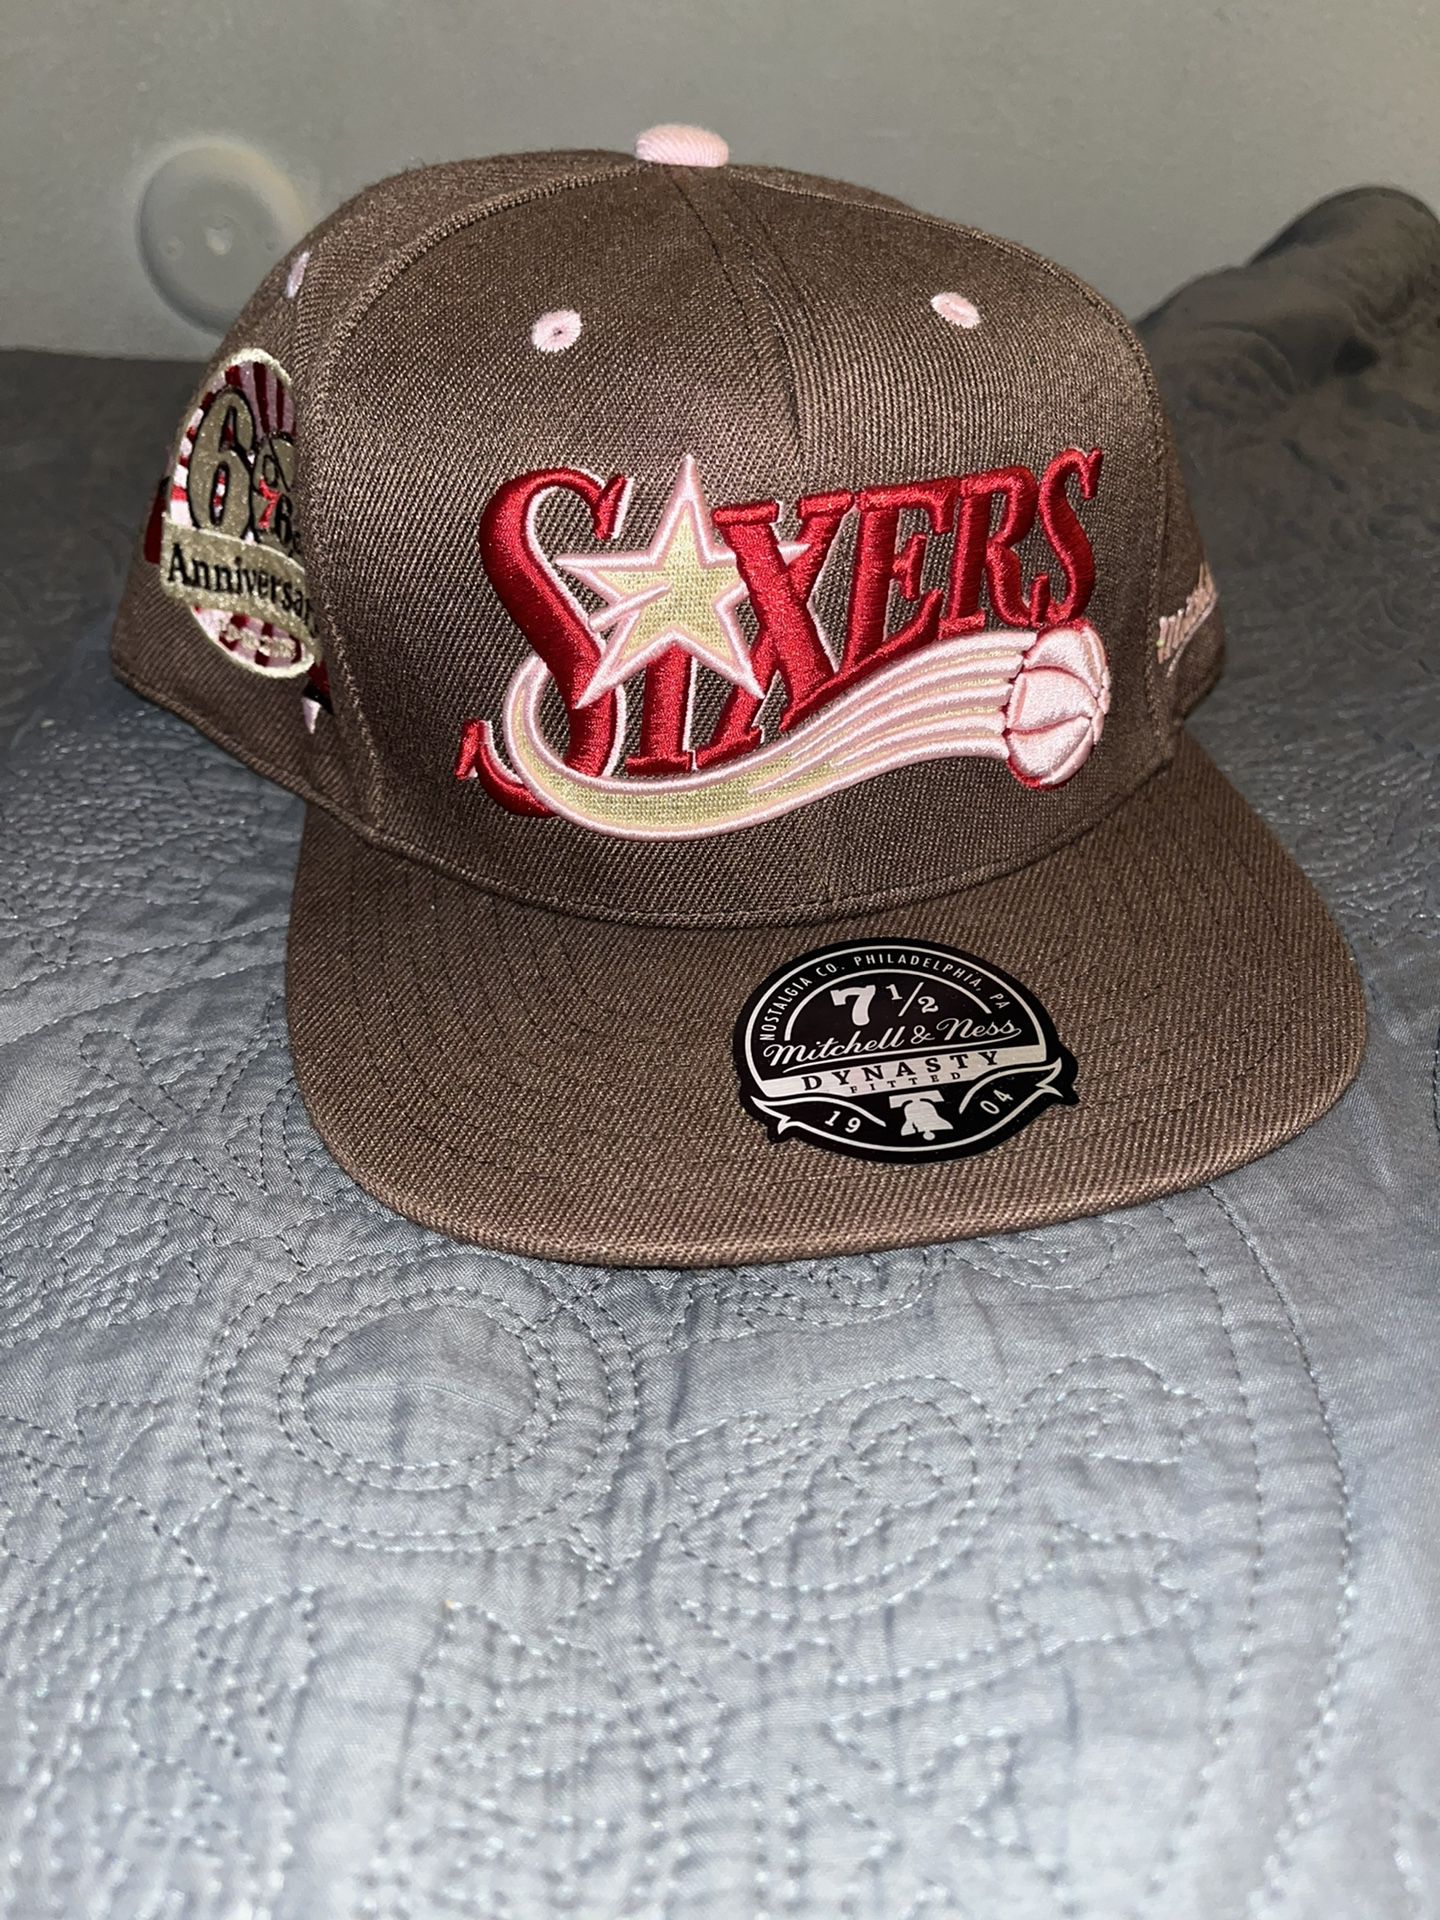 Brown and pink 76ers 60th anniversary  fitted hat size 7 1/2 